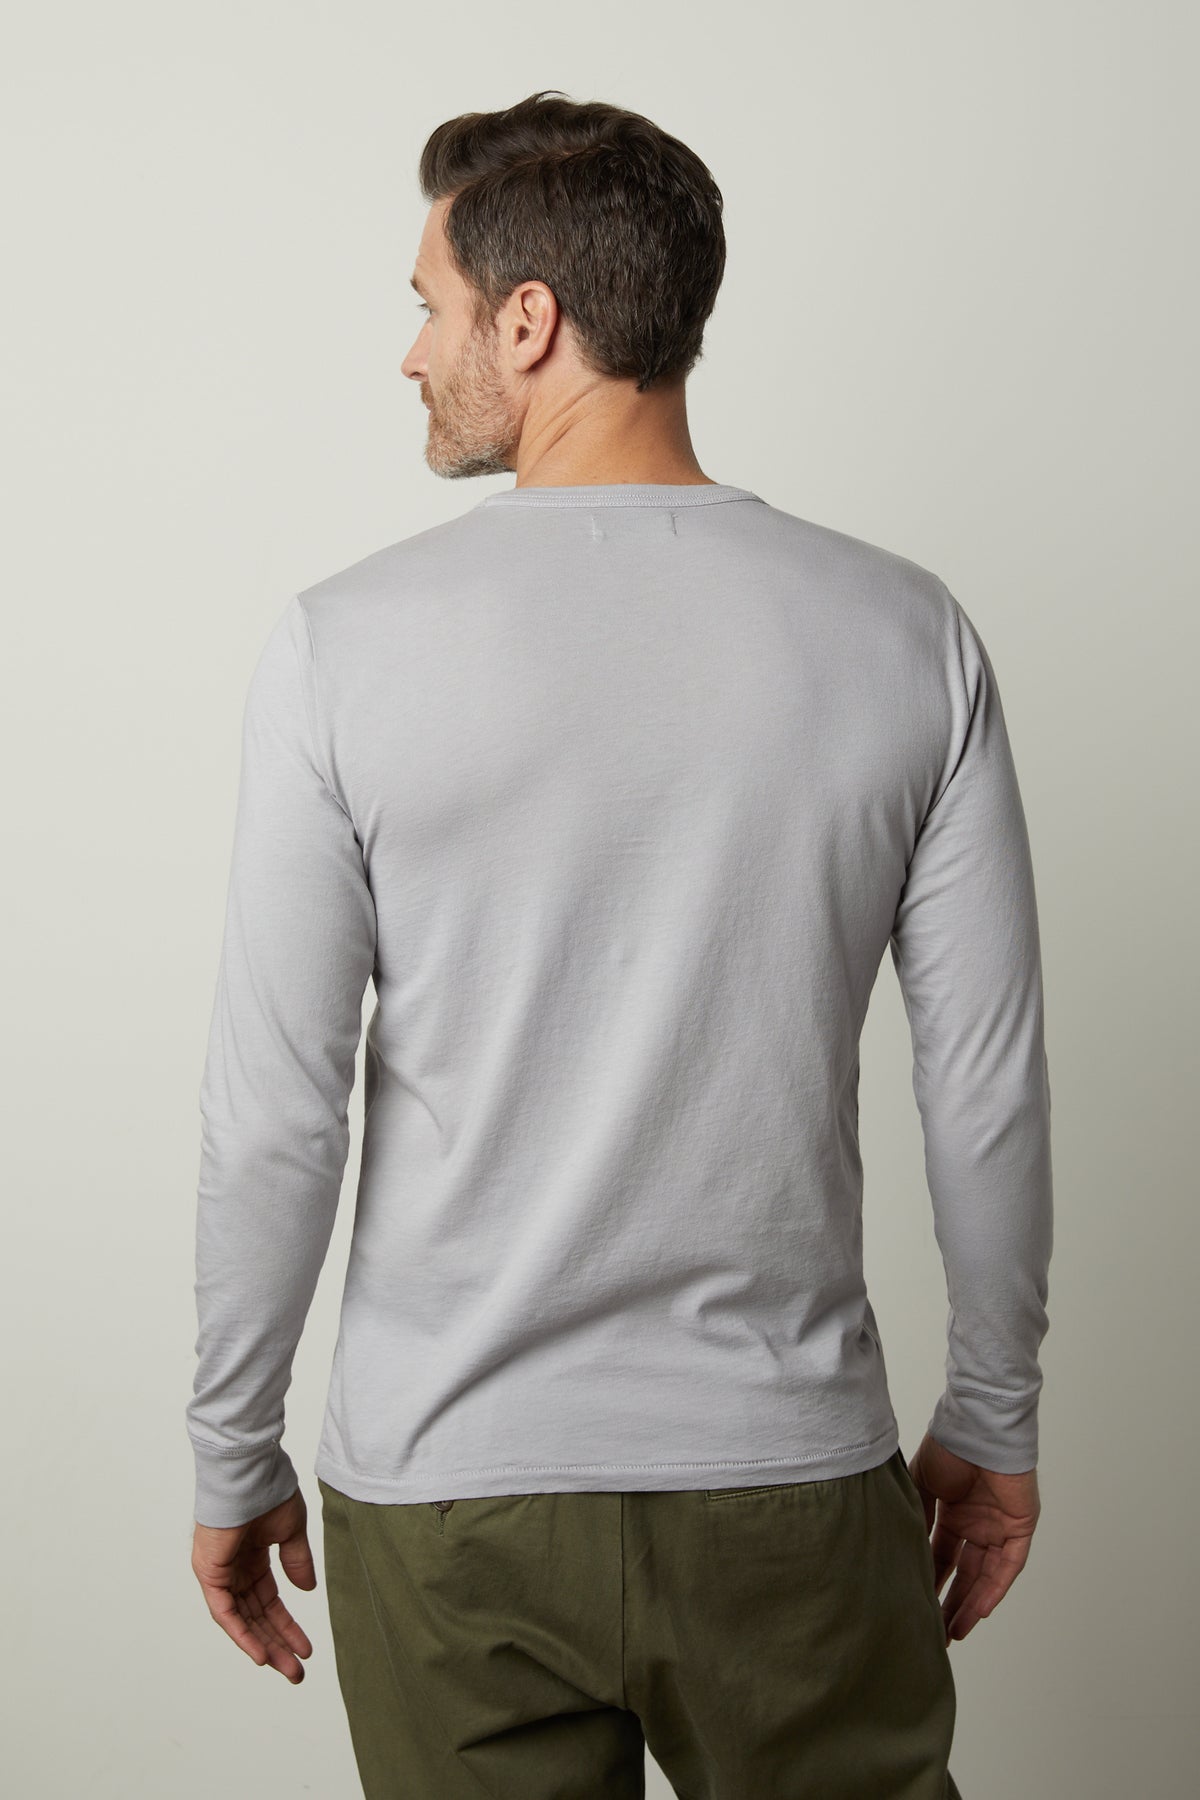 The back view of a man wearing a Velvet by Graham & Spencer Strauss crew neck tee.-26846183227585